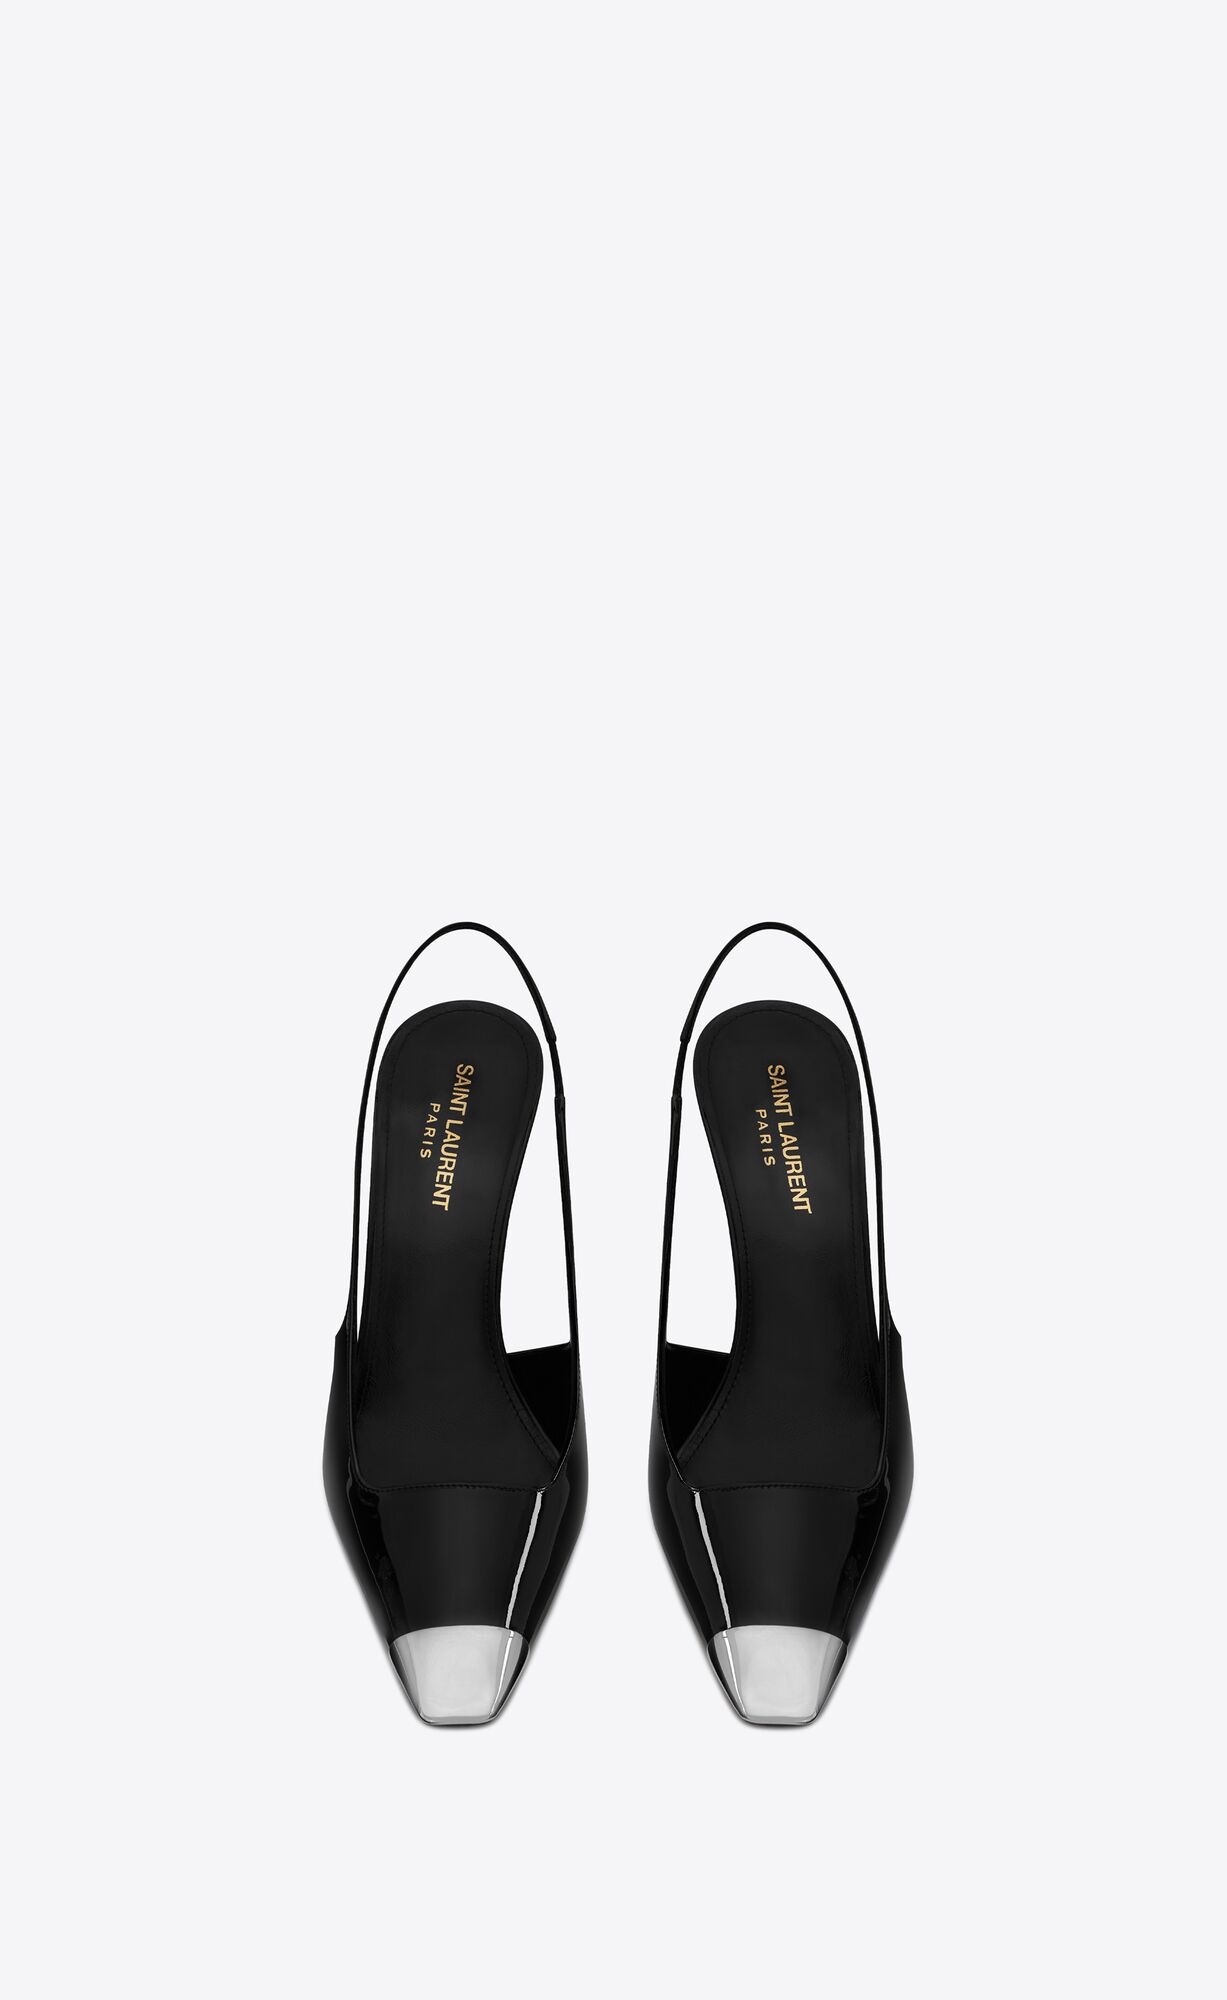 BLADE slingback pumps in patent leather | Saint Laurent United States ...